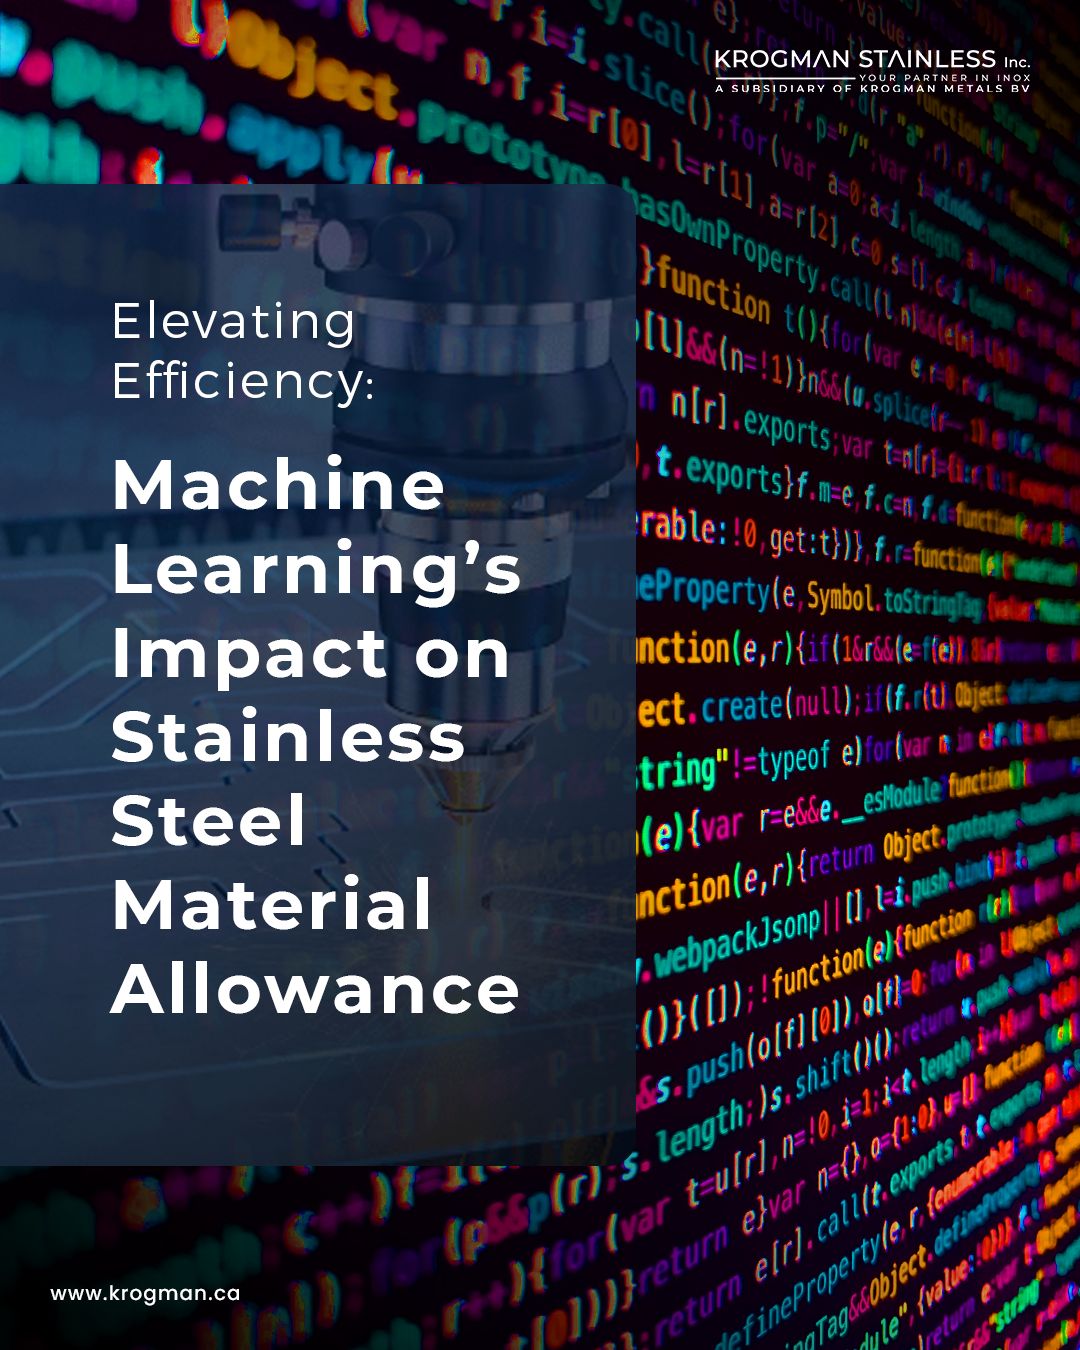 Machine Learning's Impact on Stainless Steel Material Allowance